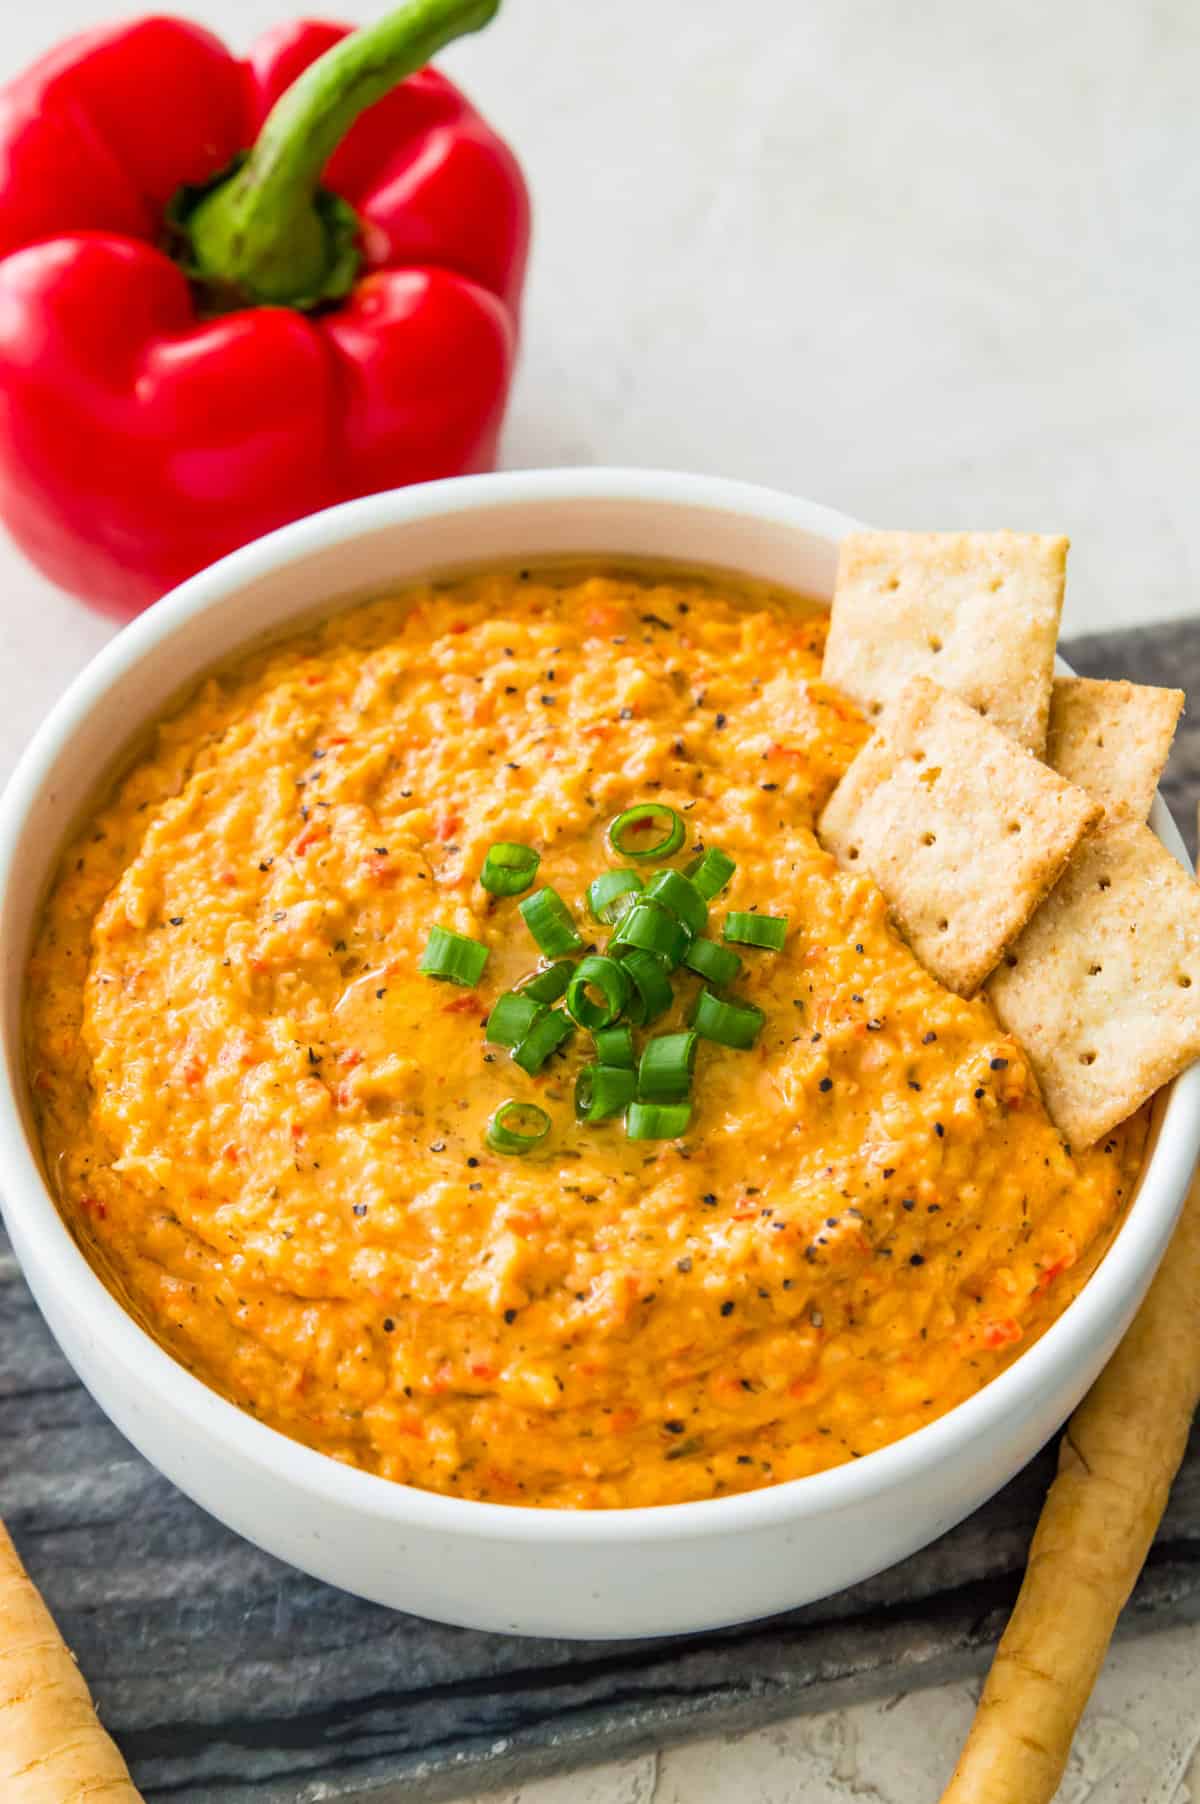 A bowl of vegan roasted red pepper dip garnished with chopped green onion with four crackers in it.